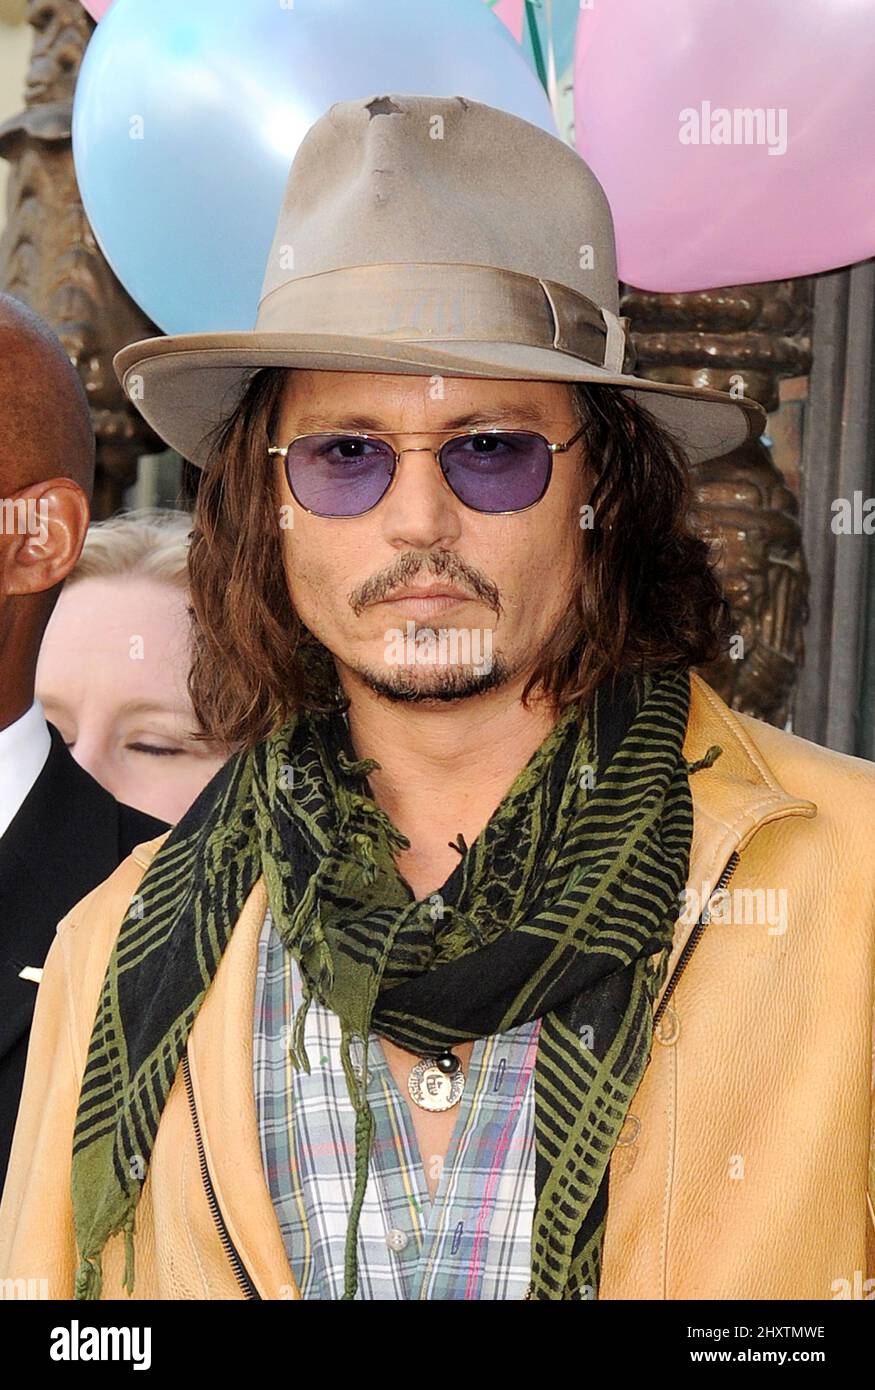 Johnny Depp as Penelope Cruz is honored as the first spanish born actress to receive a star on the Hollywood Walk of Fame on April 1, 2011 in Hollywood, California. Stock Photo